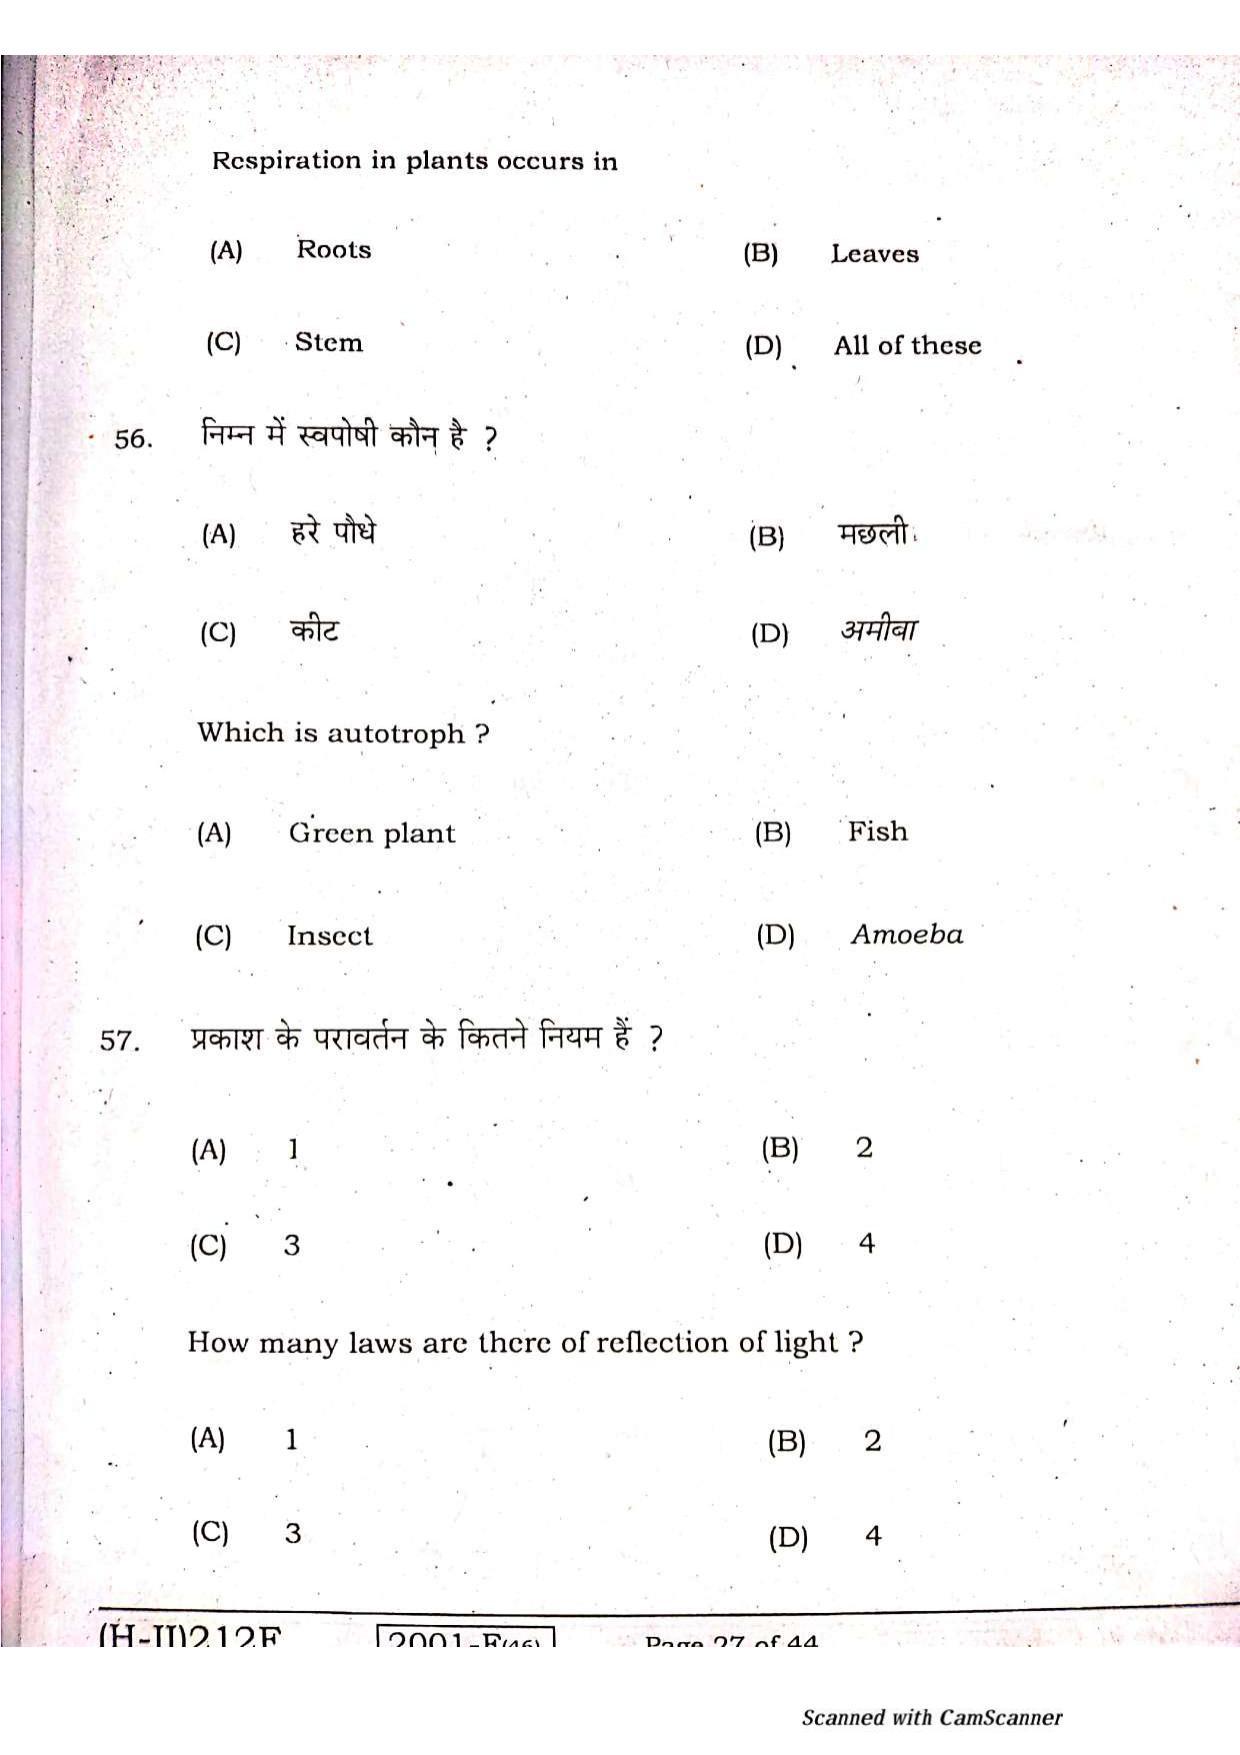 Bihar Board Class 10 Science 2021 (2nd Sitting) Question Paper - Page 25